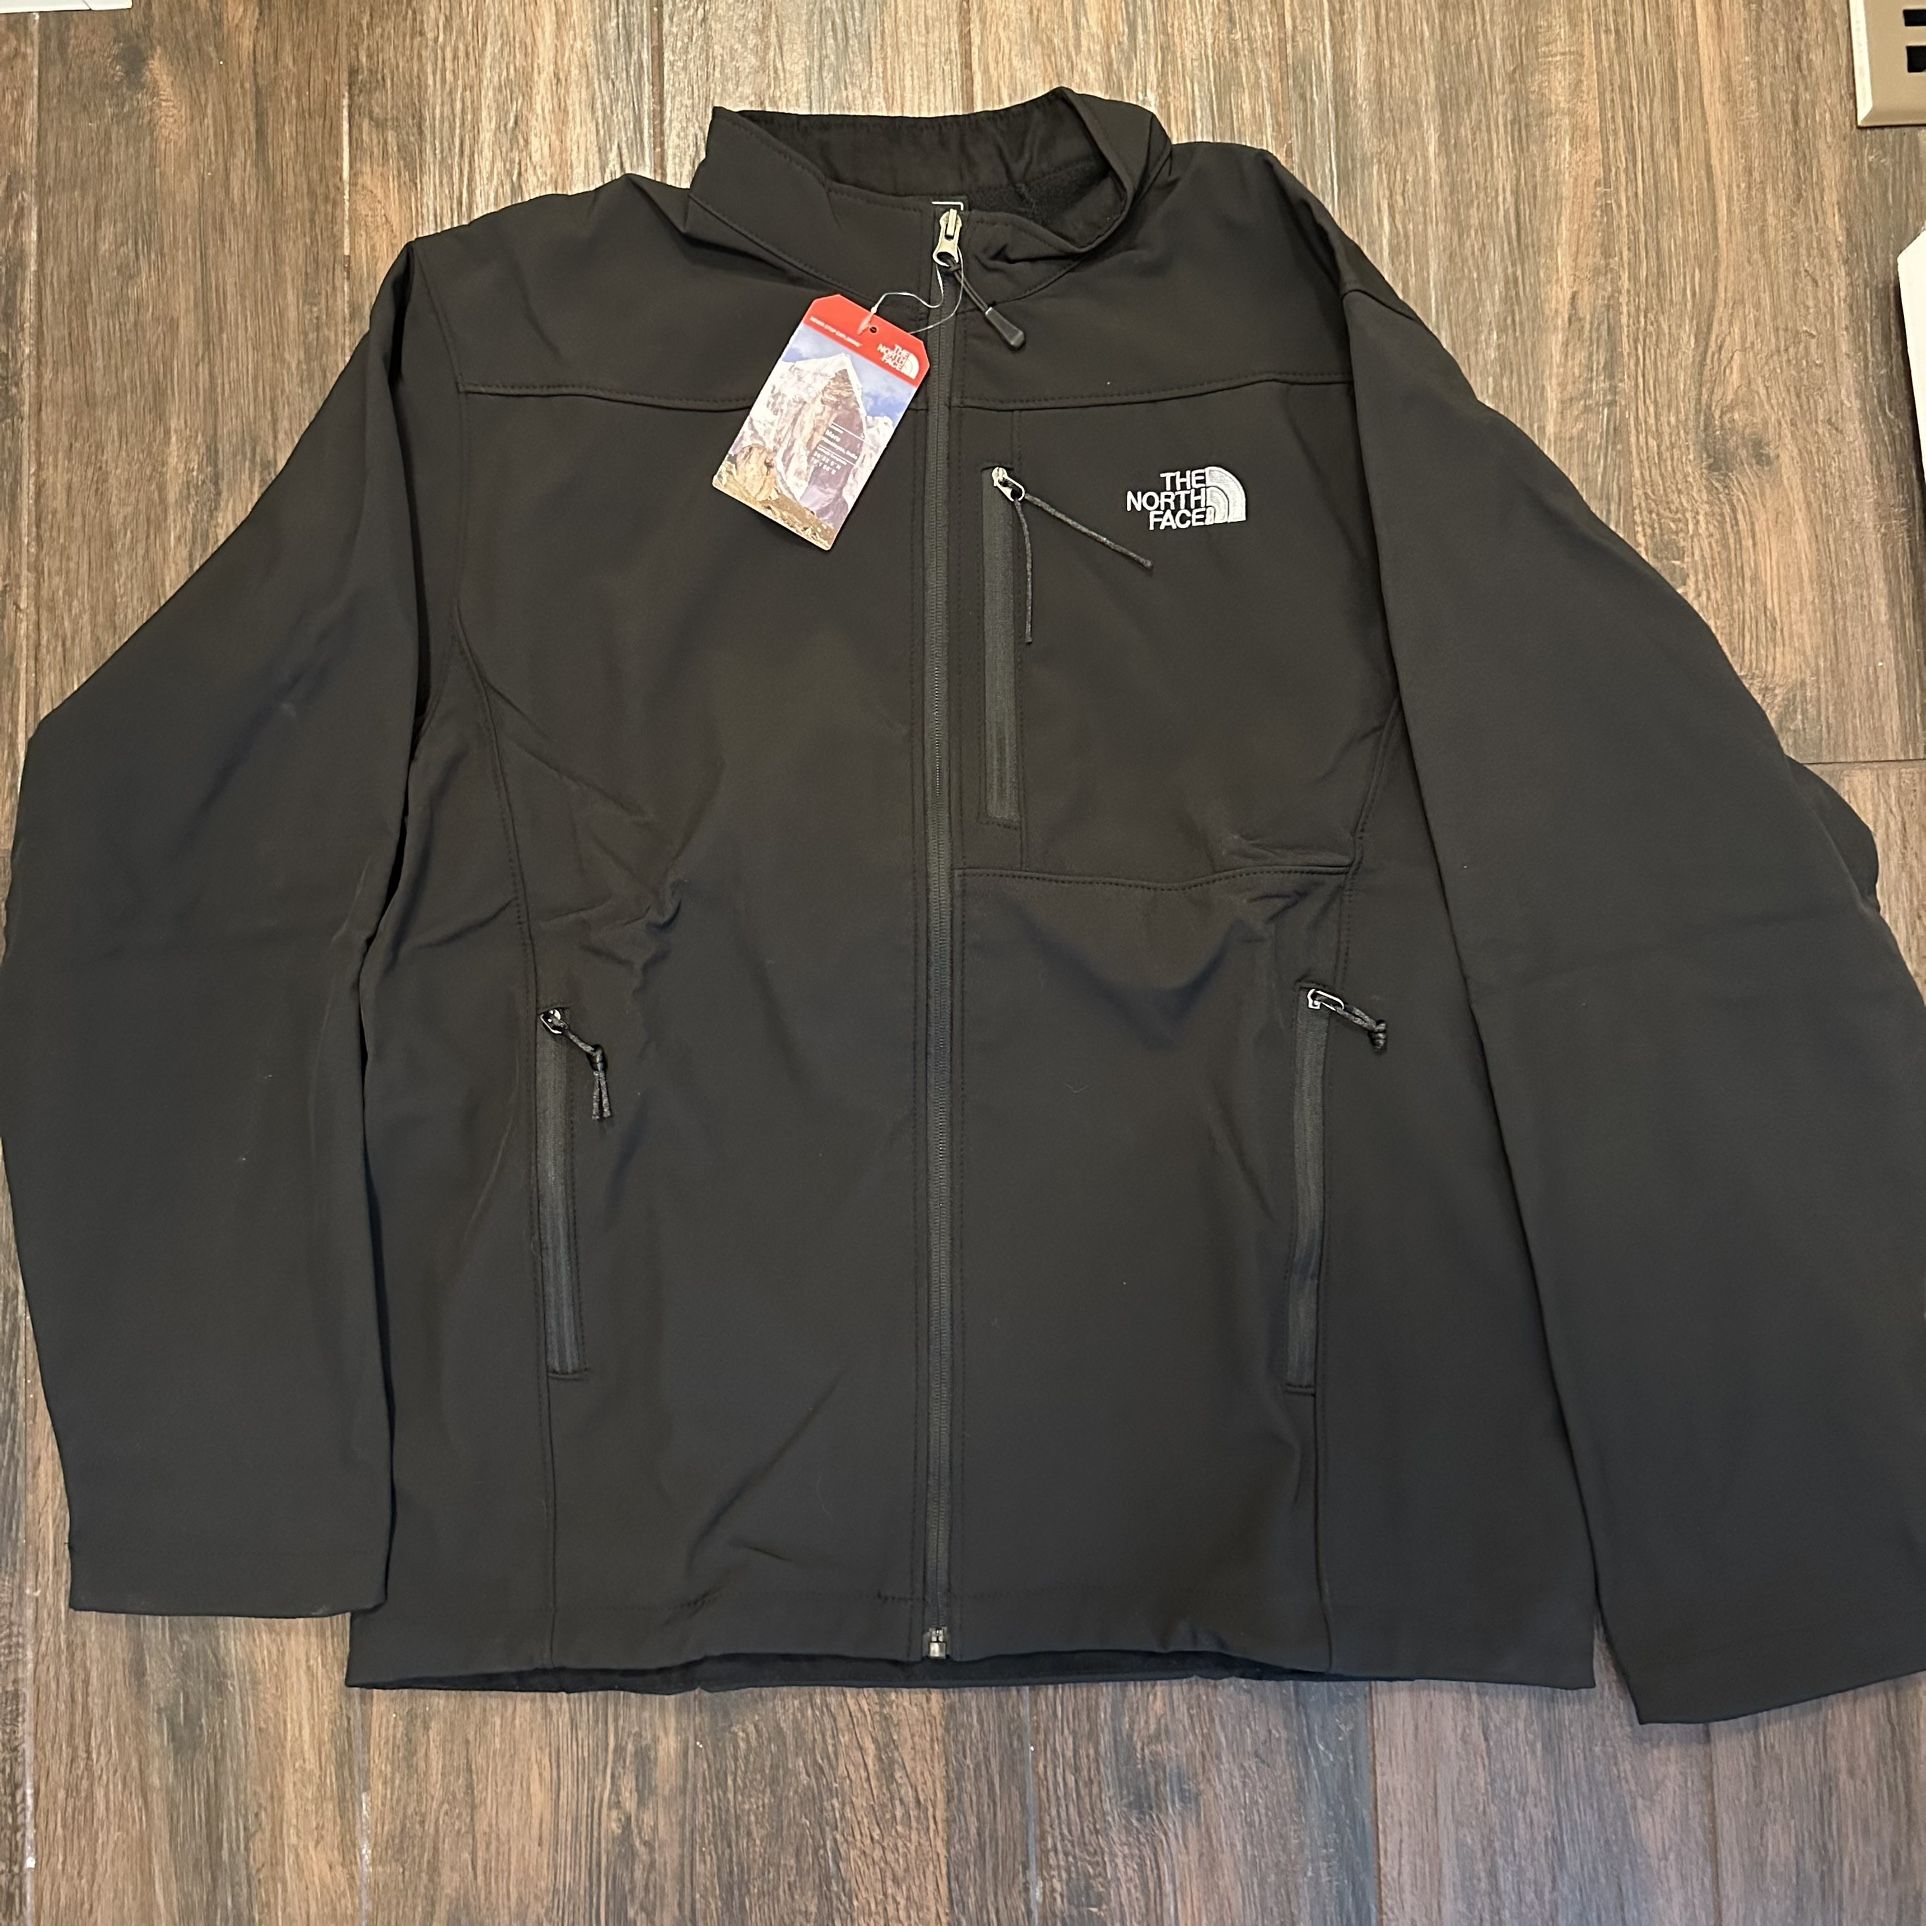  The North Face Men's Apex Bionic Jacket